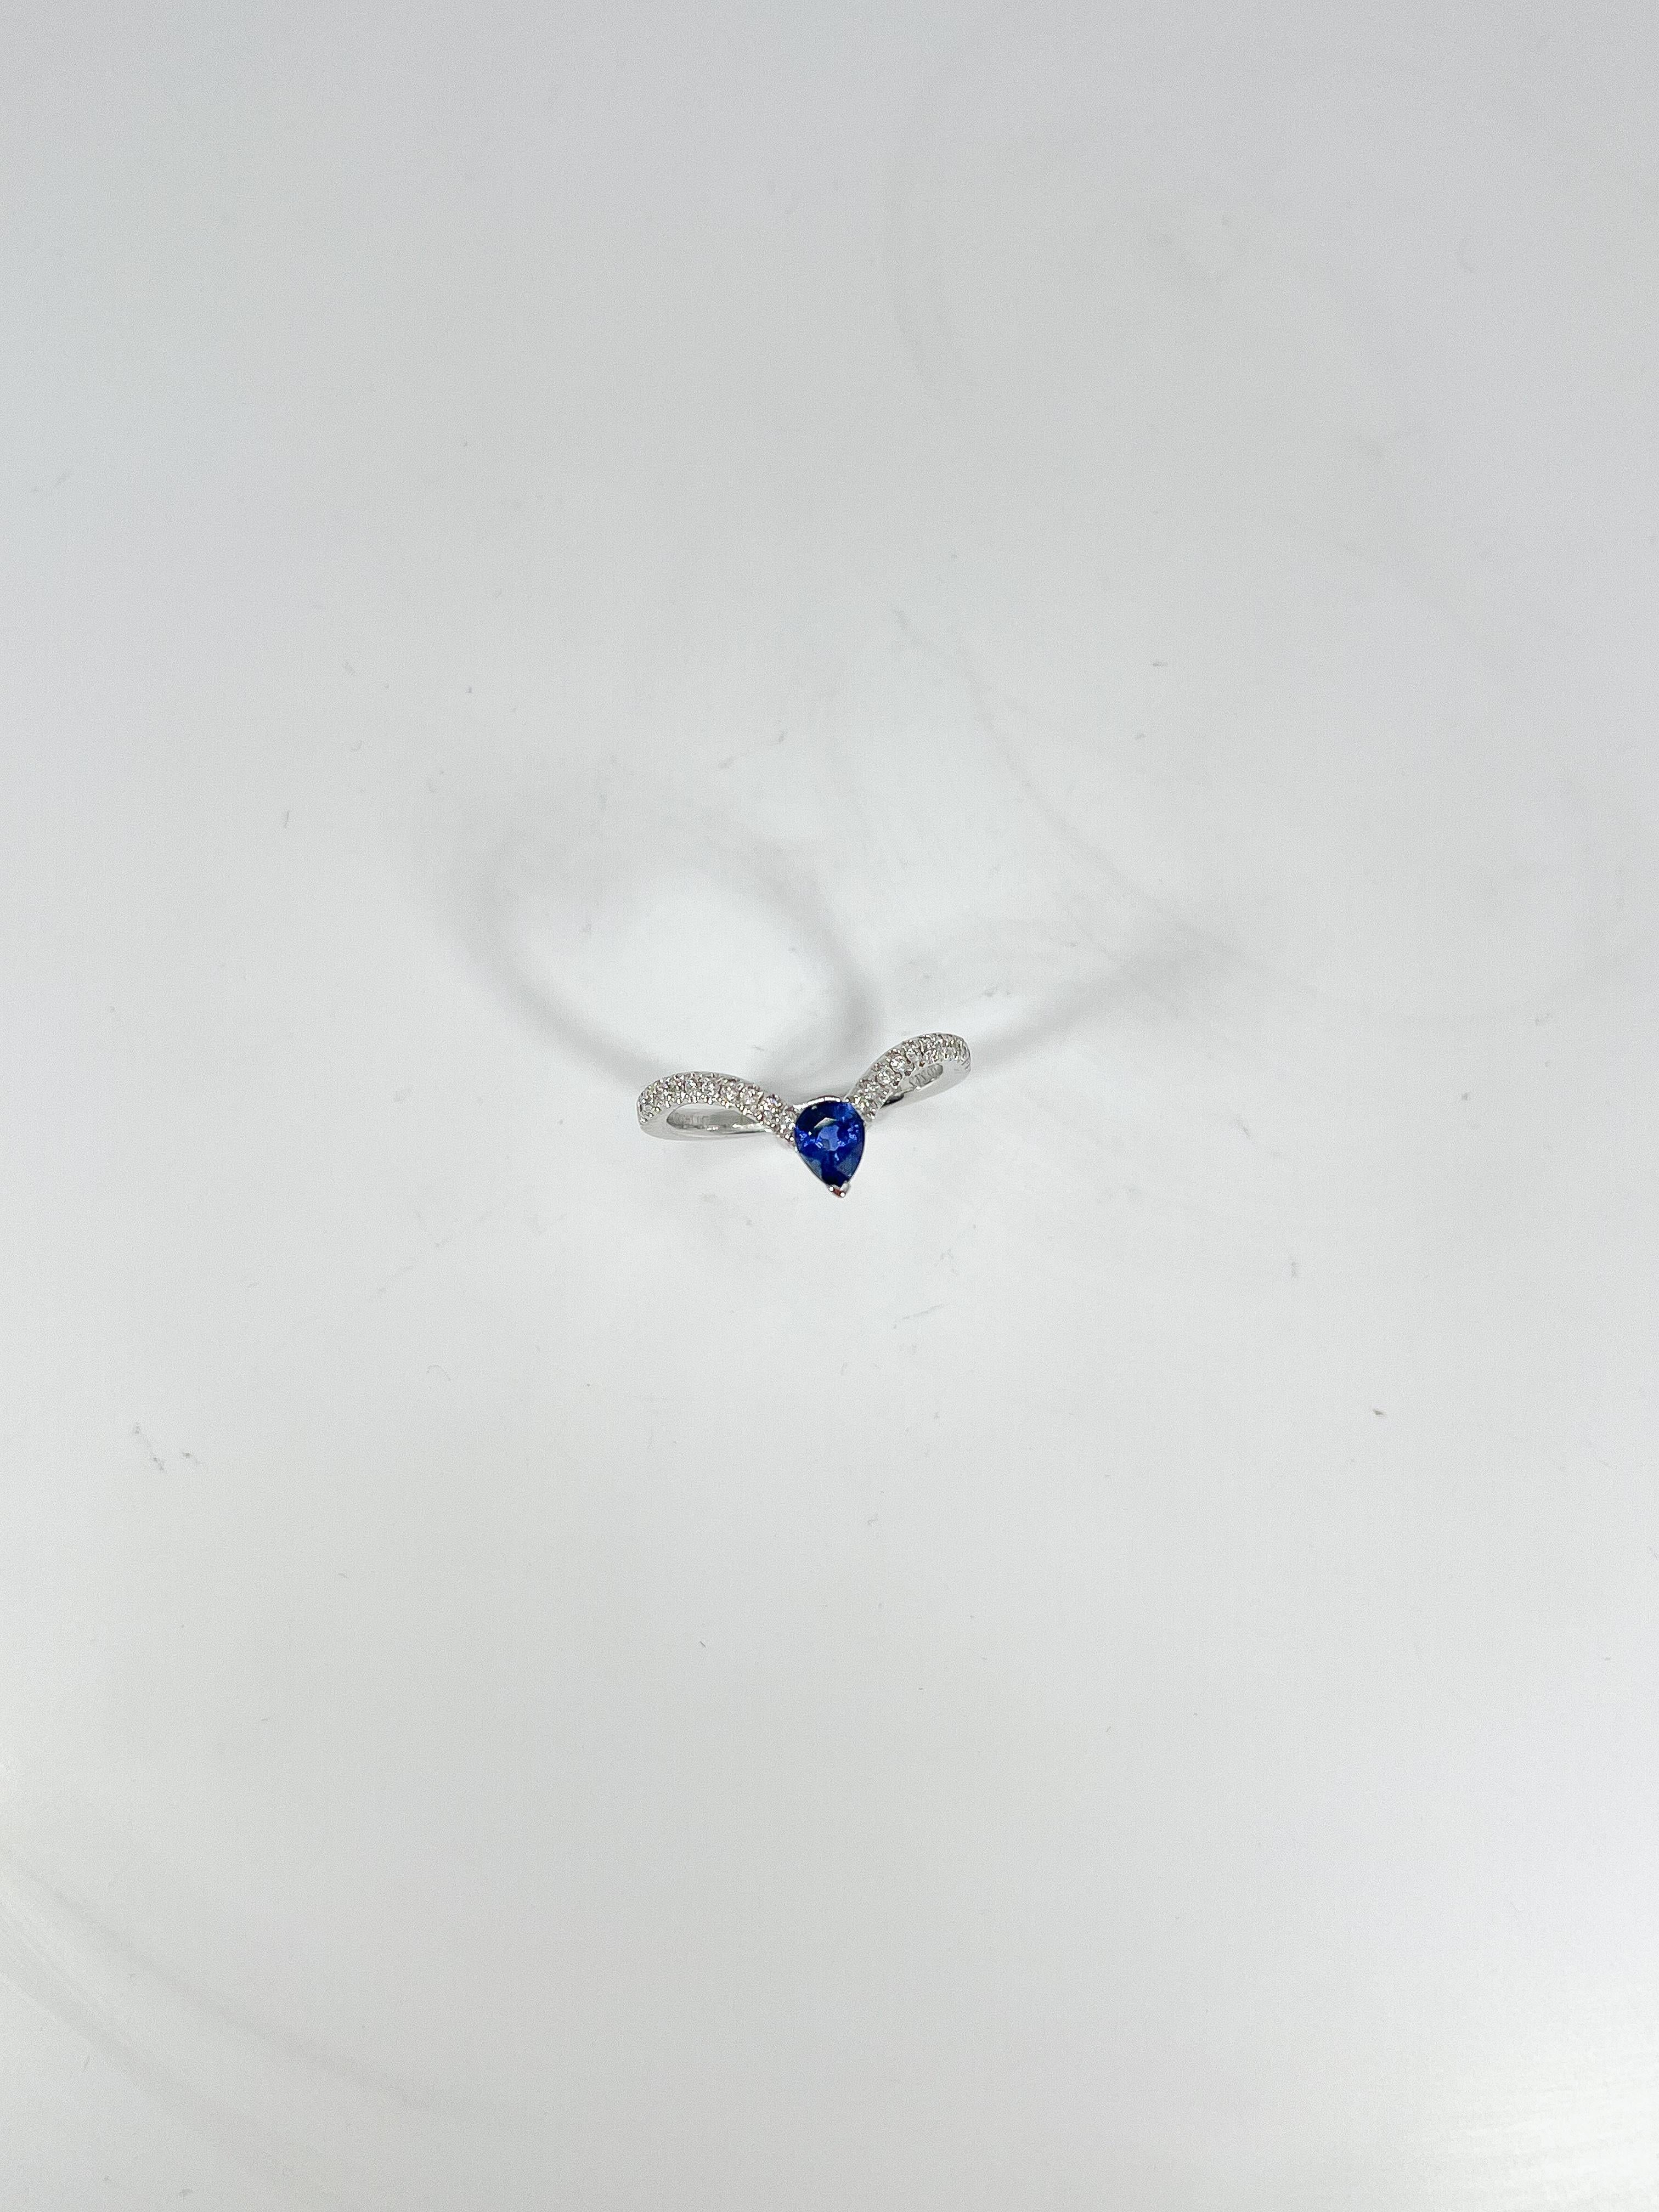 14k white gold pear sapphire and diamond V shaped ring. Pear sapphire as the center stone, measures 6 x 4 mm, diamond side stones that go halfway down the shank. The ring is a size 6 1/4 and has a total weight of 2.35 grams.